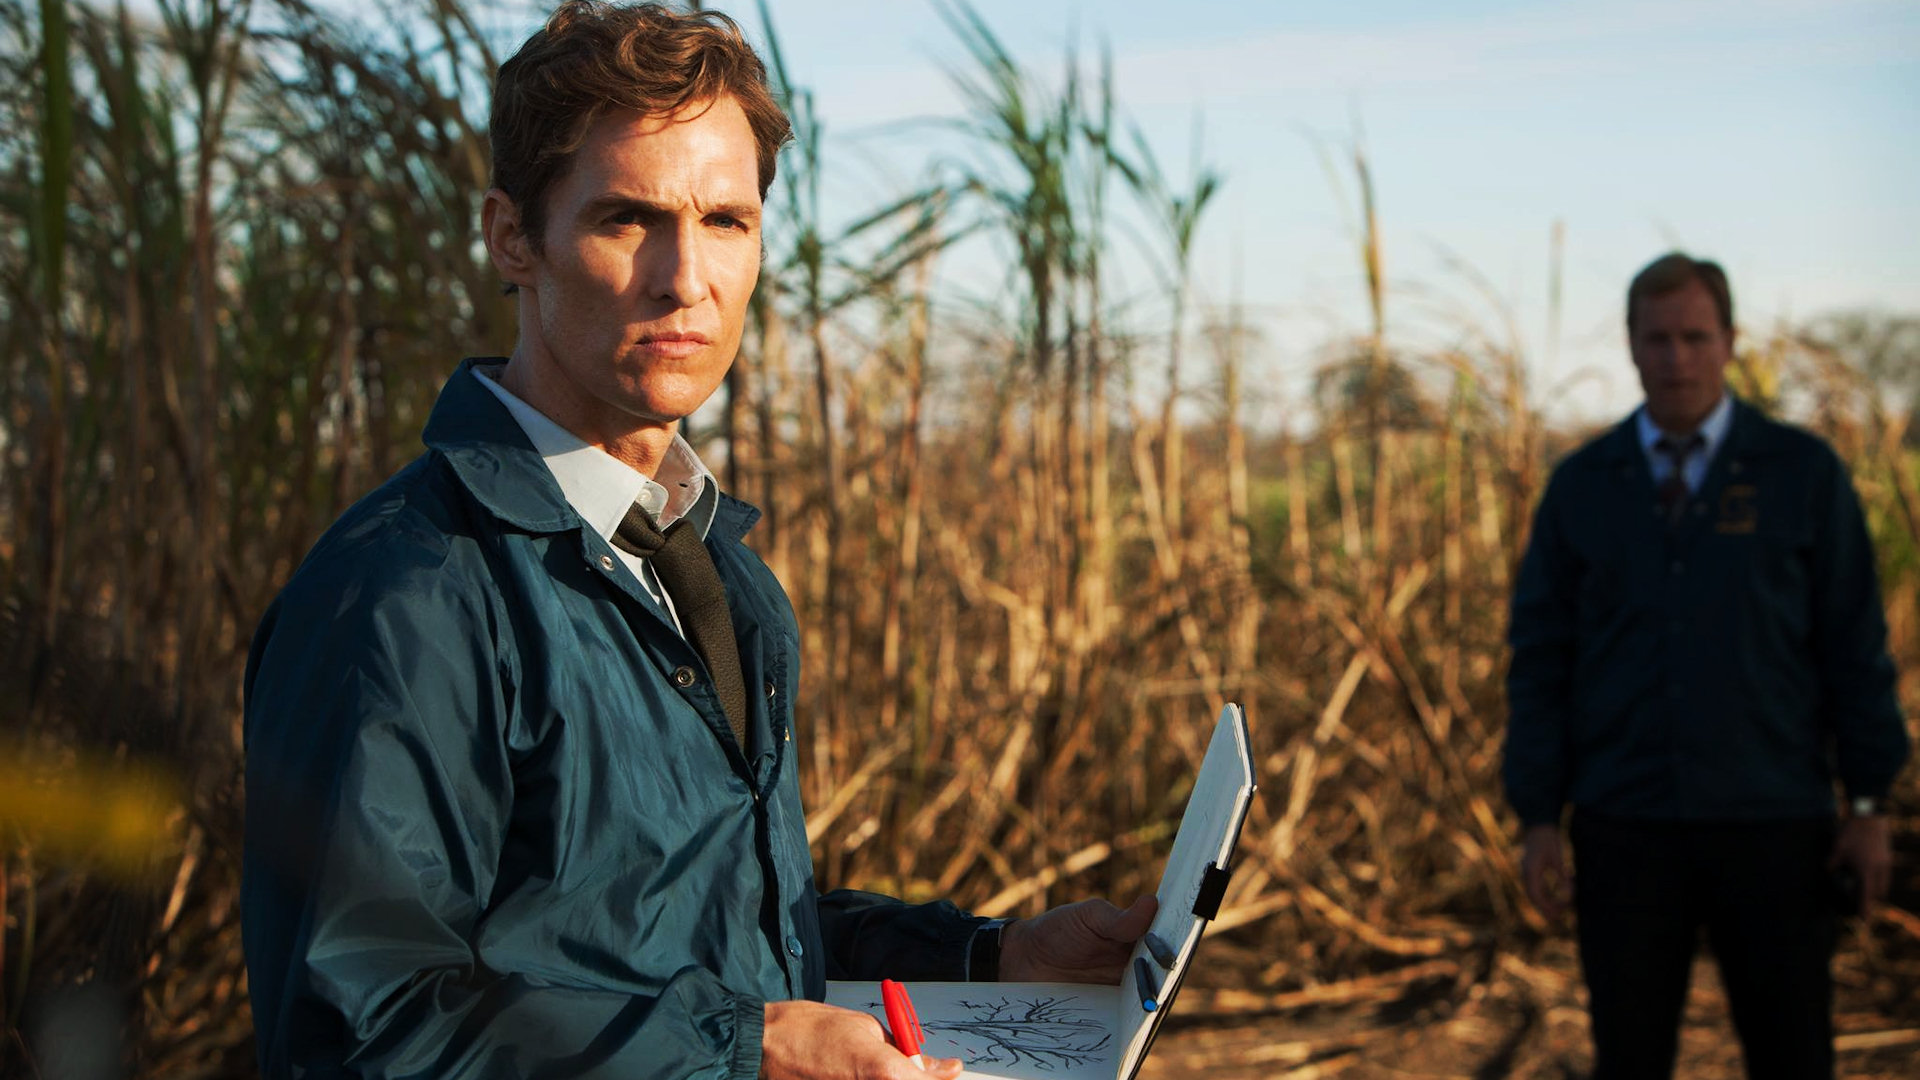 True Detective - Rust Cohle in 2012 » BAMF Style